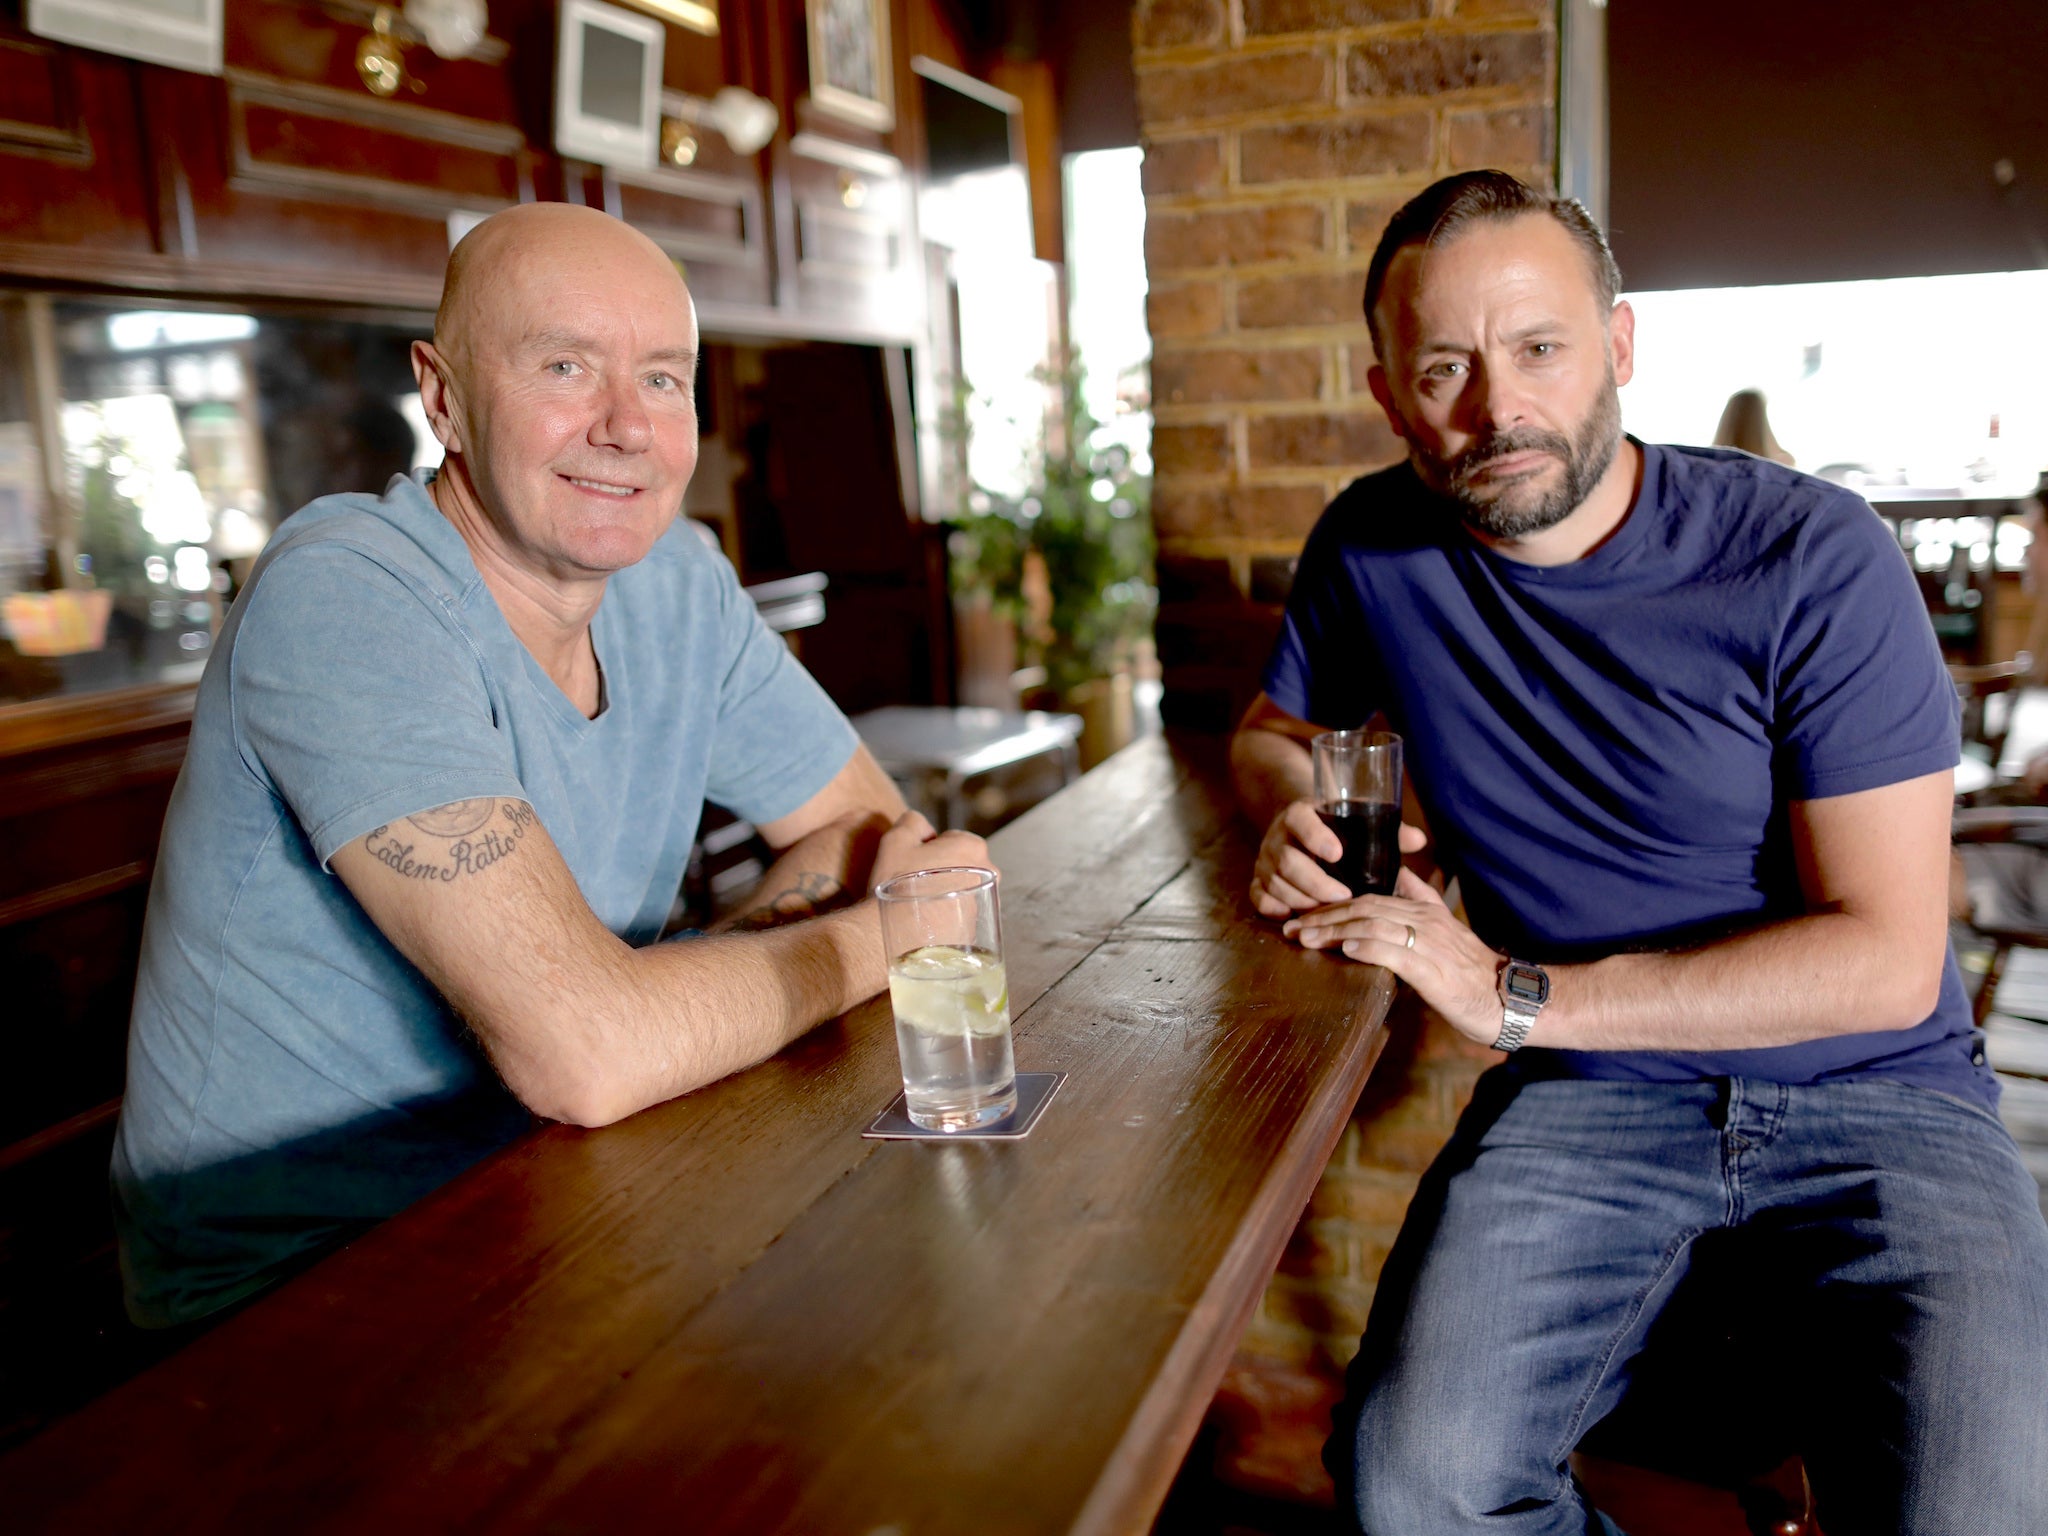 Comedian Geoff Norcott is interviewed by Welsh in the forthcoming documentary